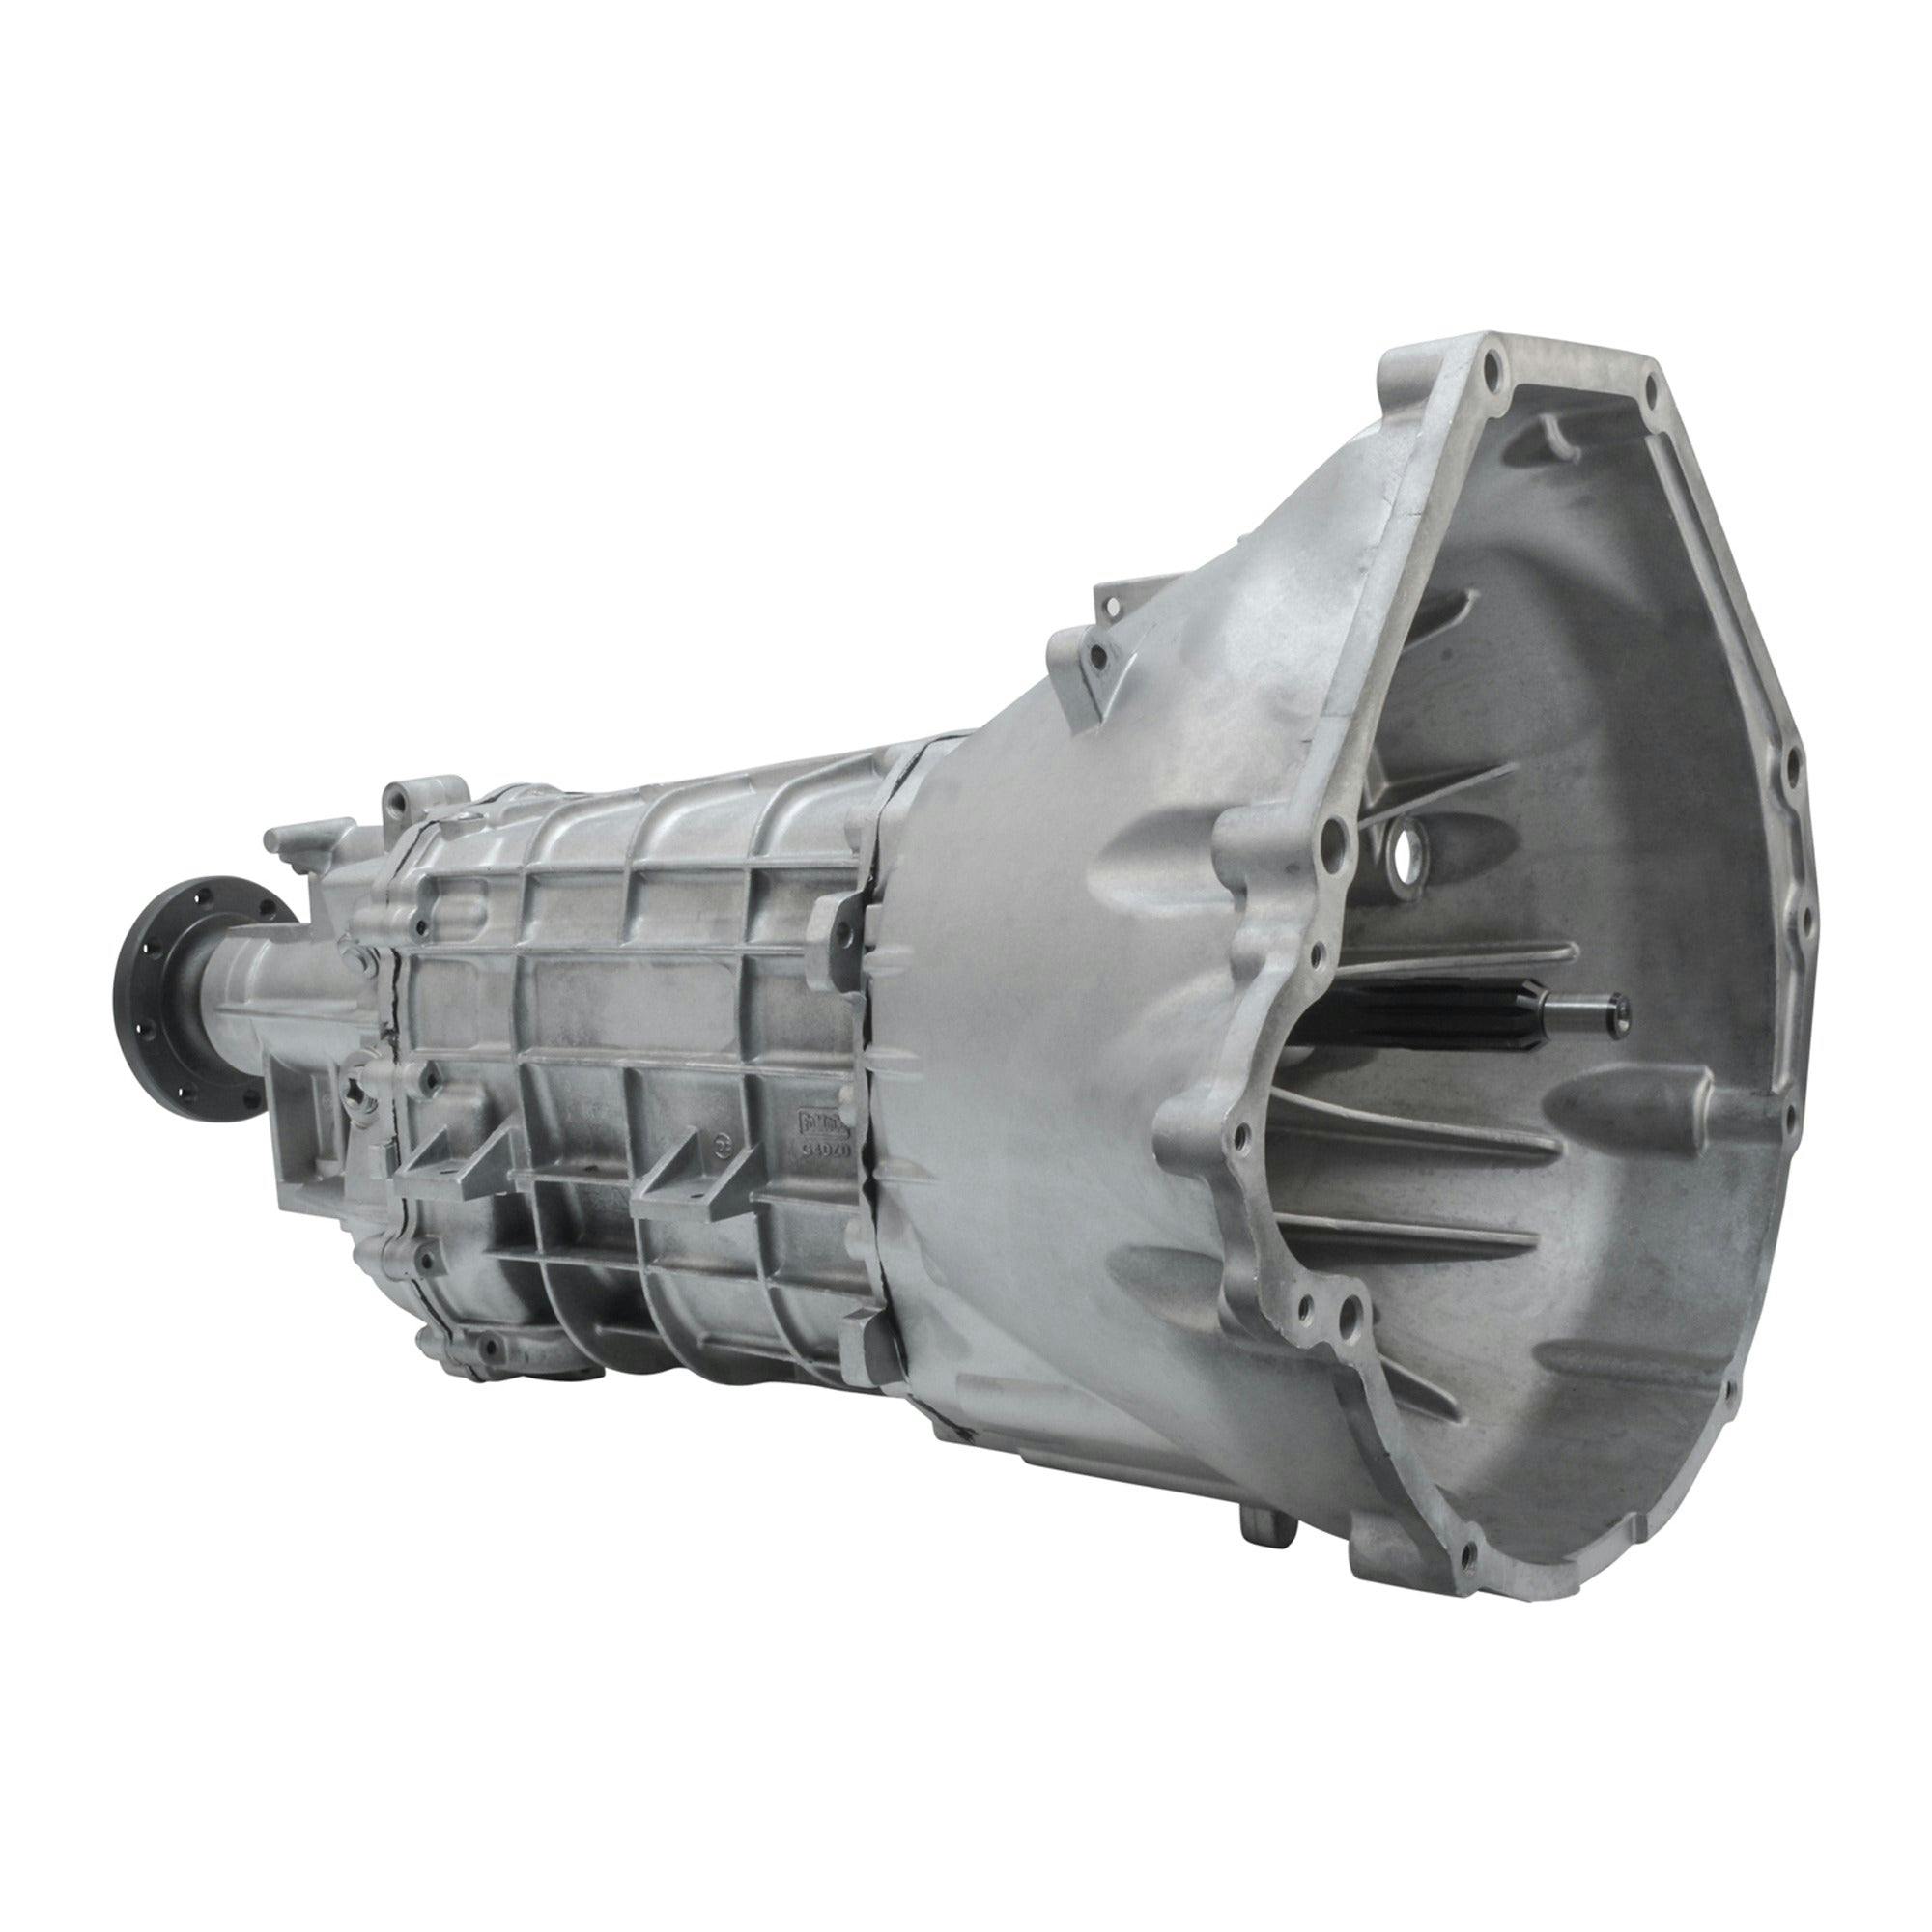 Manual Transmission for 2005-2010 Ford Mustang RWD with 4.6L V8 Engine